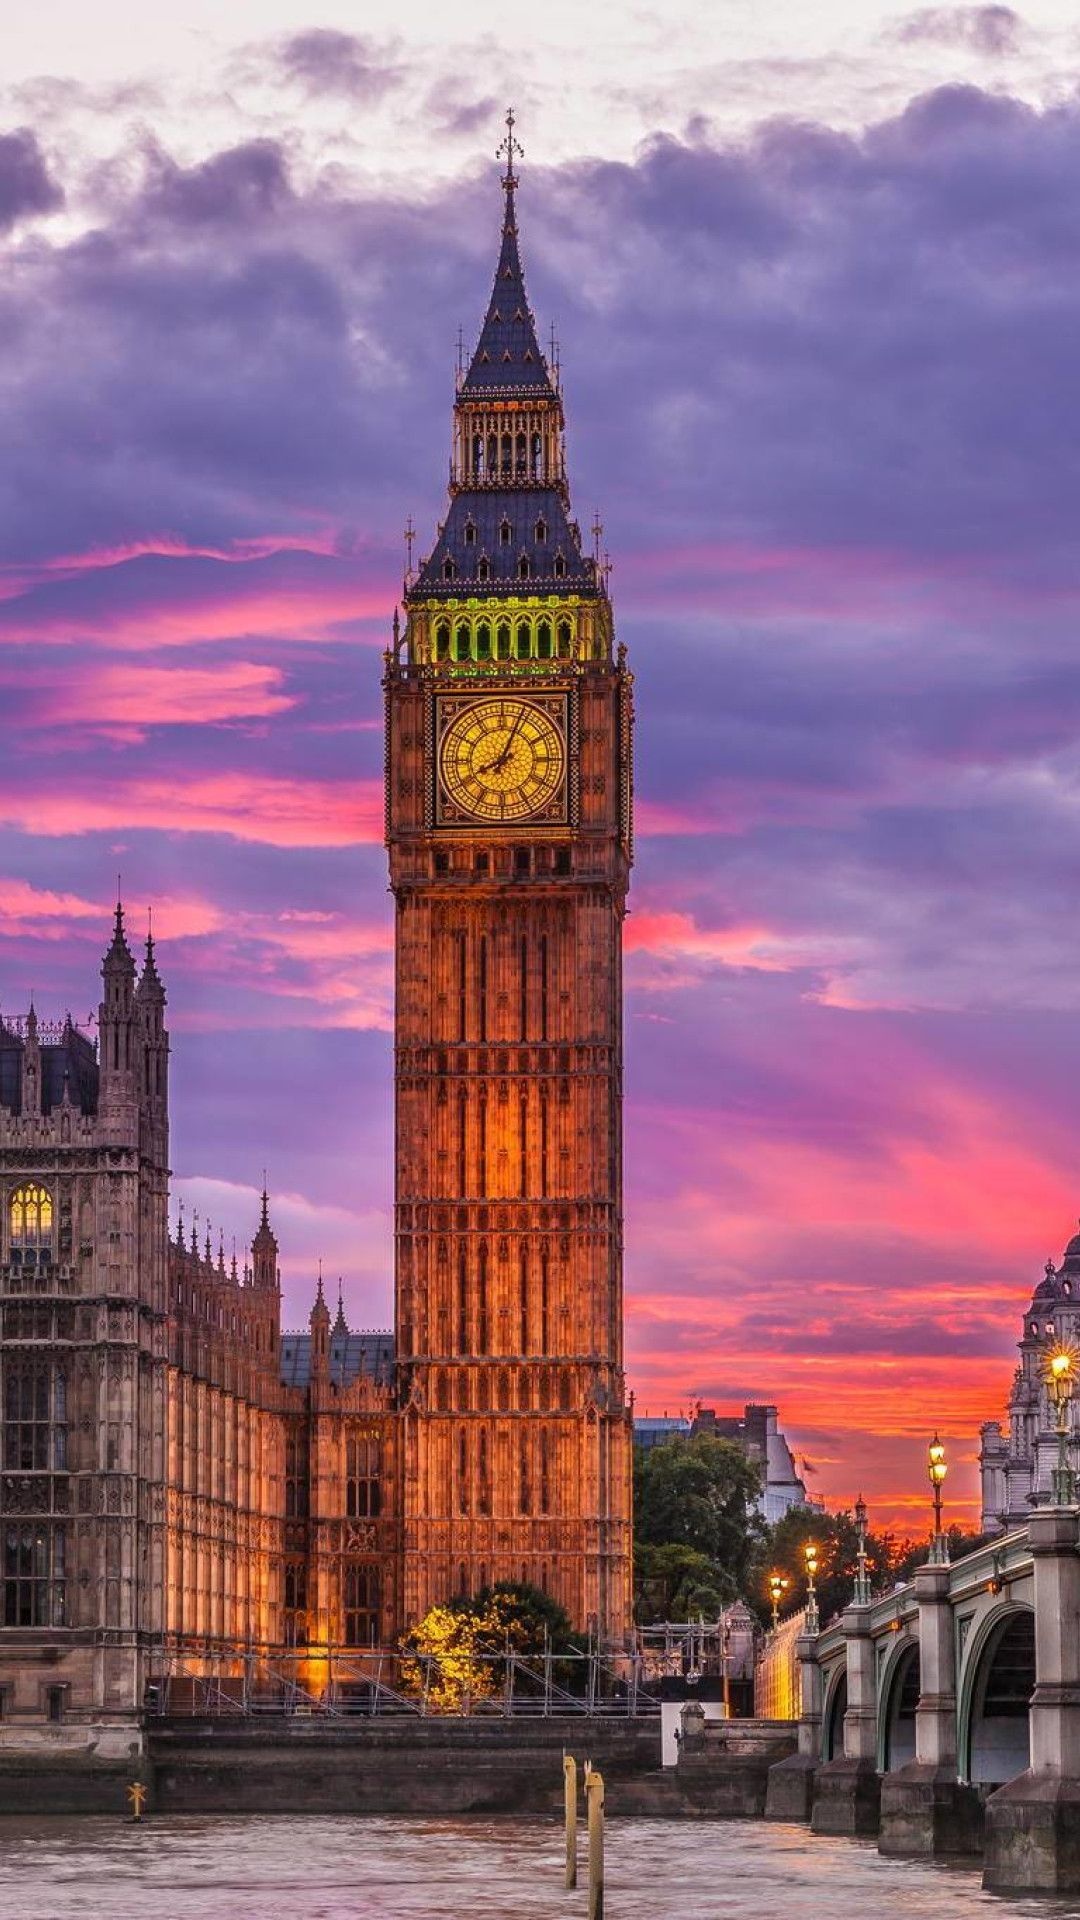 London England iPhone wallpapers, Free backgrounds, Big Ben, 1080x1920 Full HD Phone